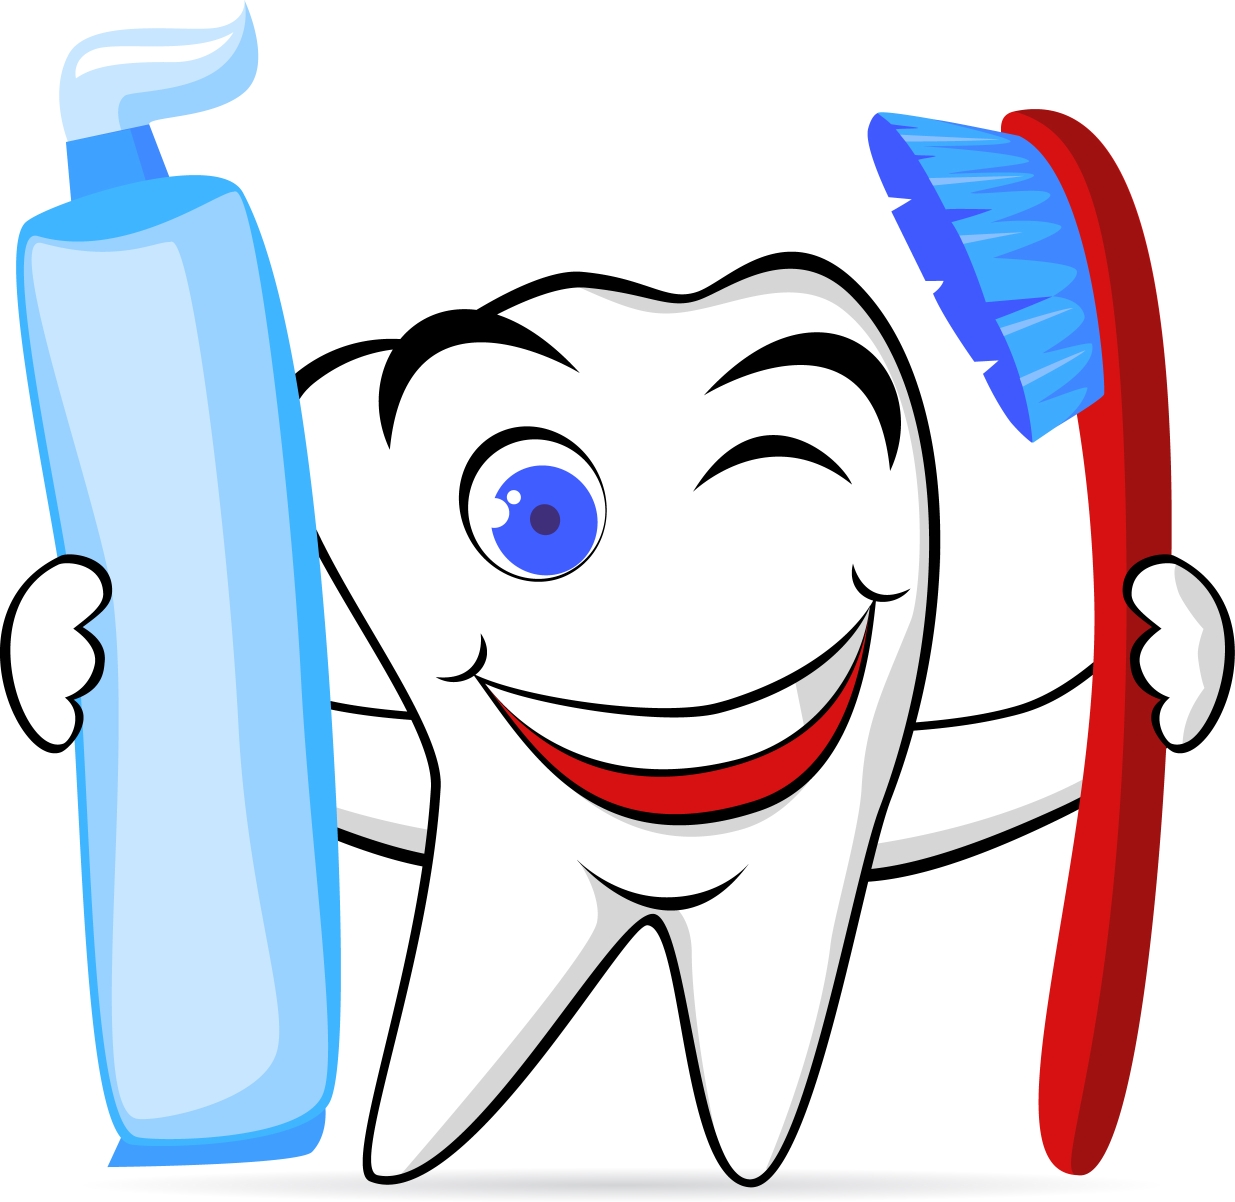 1000  images about dentist clip art on Pinterest | Teeth ache, Clip art and Best teeth whitening kit